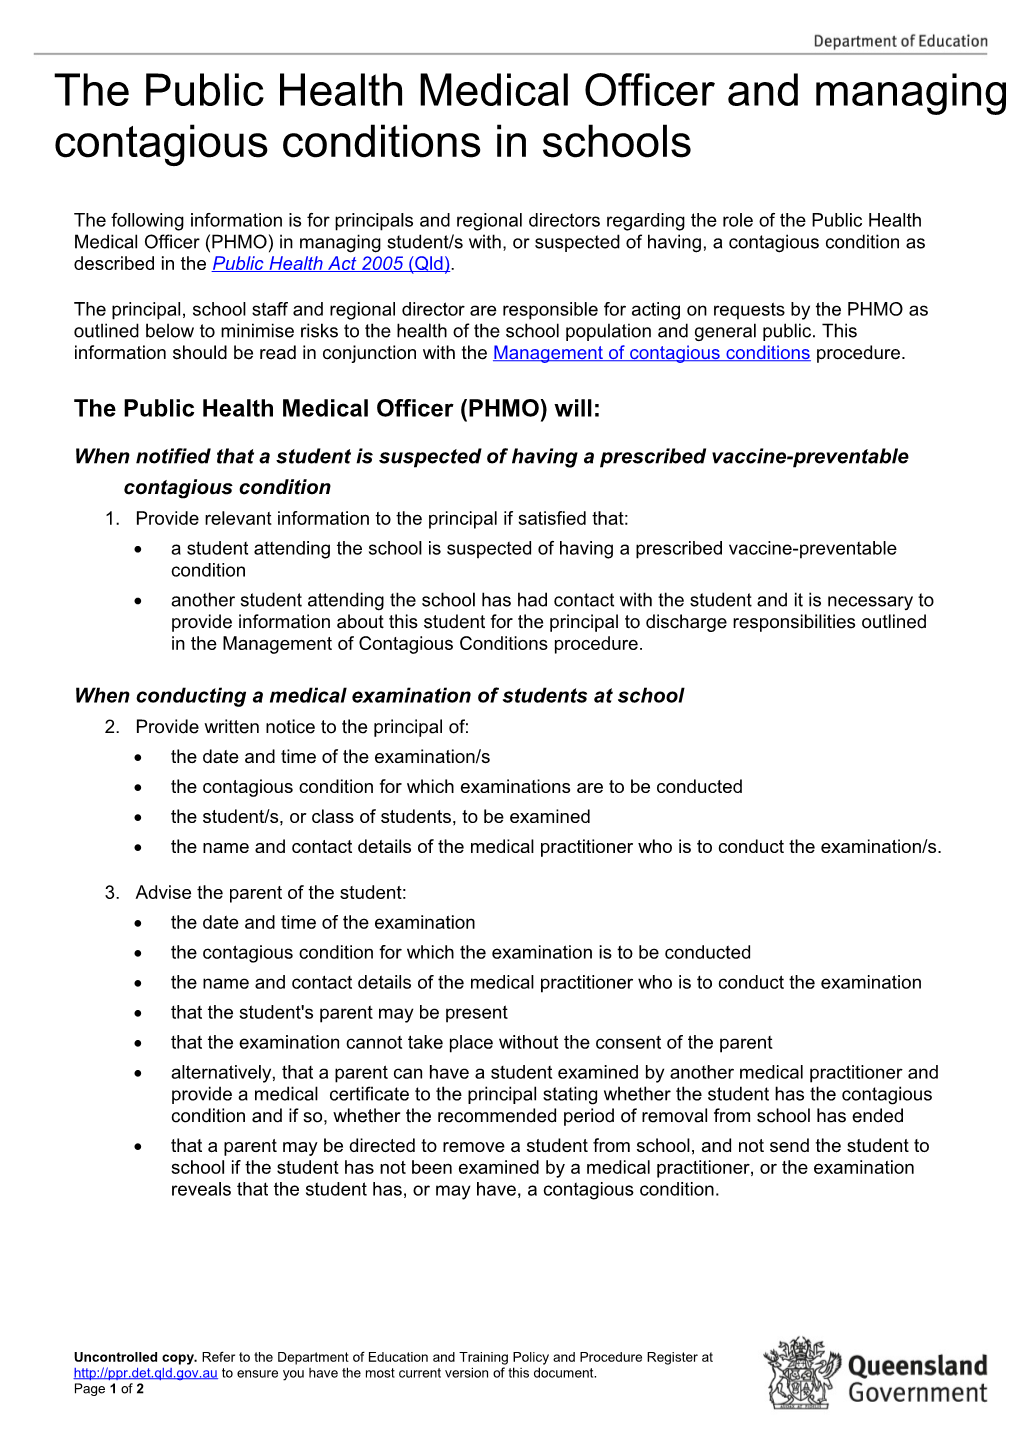 The Public Health Medical Officer and Managing Contagious Conditions in School